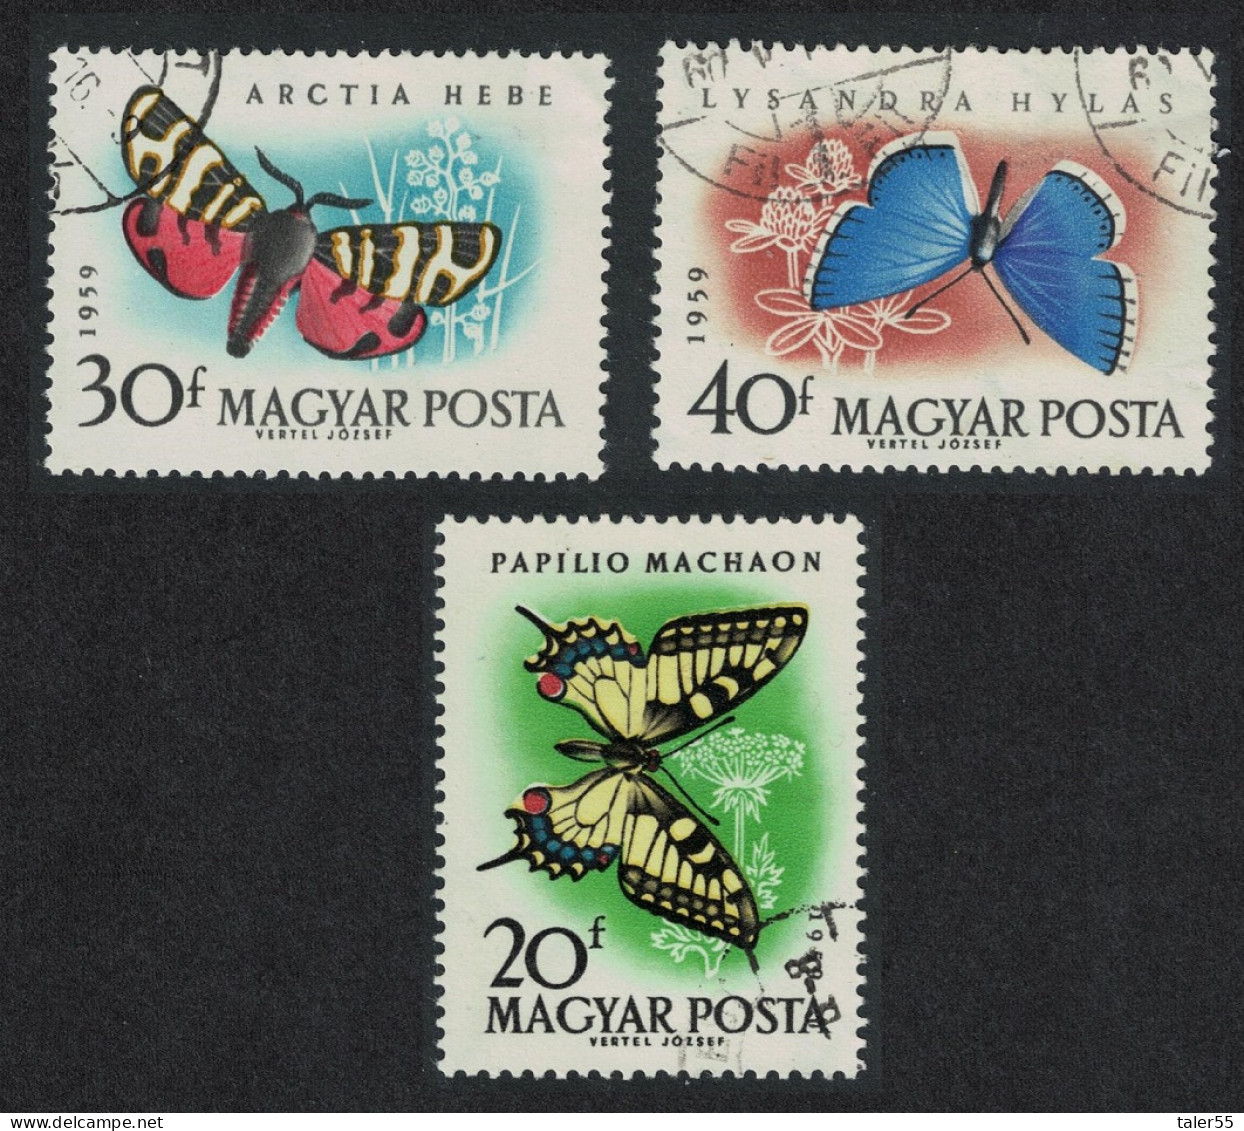 Hungary Butterflies And Moths 3v 1959 Canc SG#1612-1614 MI#1633-1635A - Used Stamps